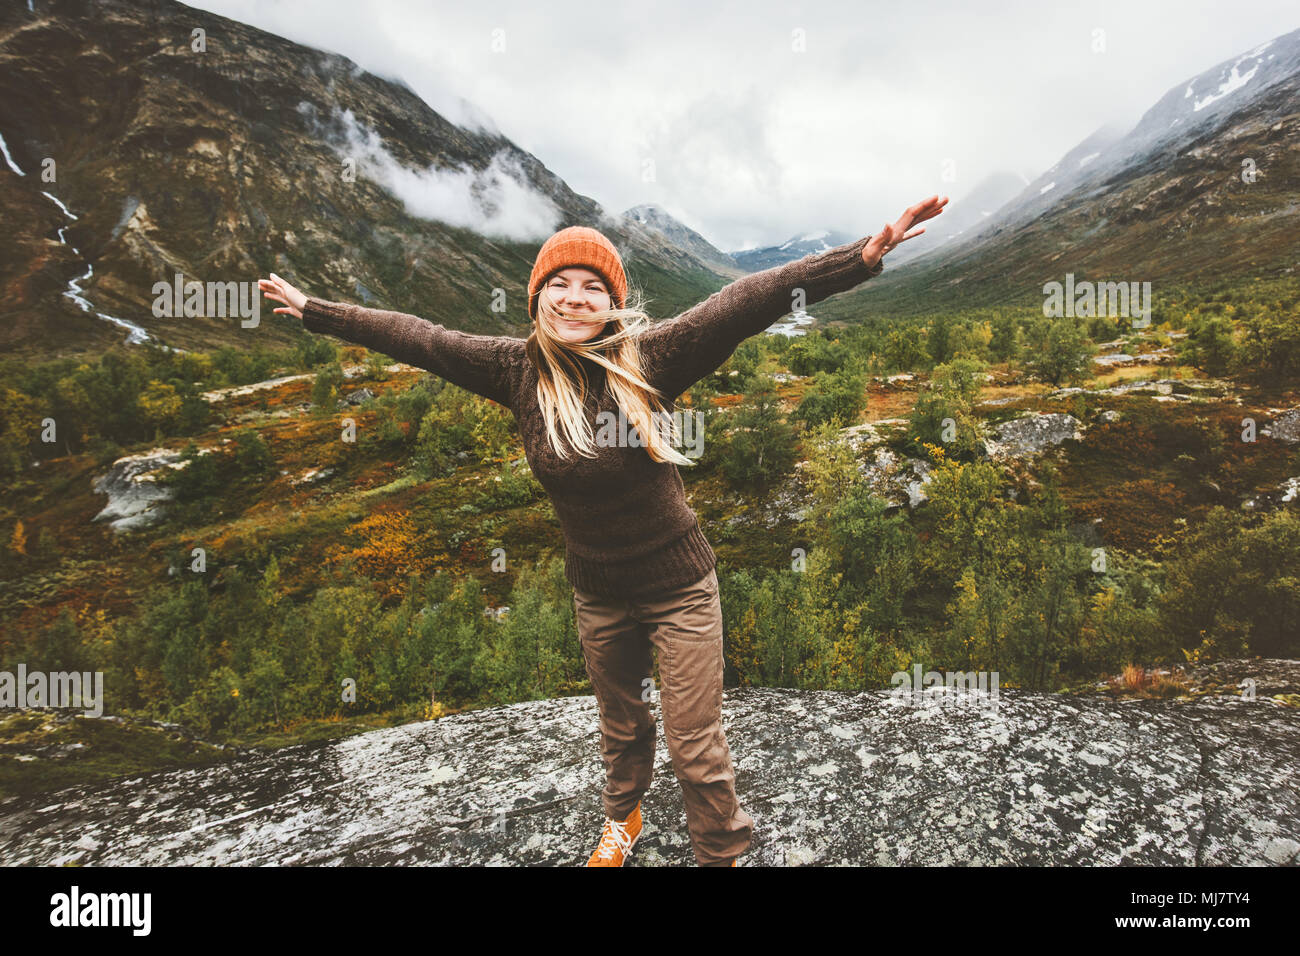 Happy woman raised hands walking in forest mountains enjoying view Travel adventure lifestyle concept active vacations in Norway Stock Photo